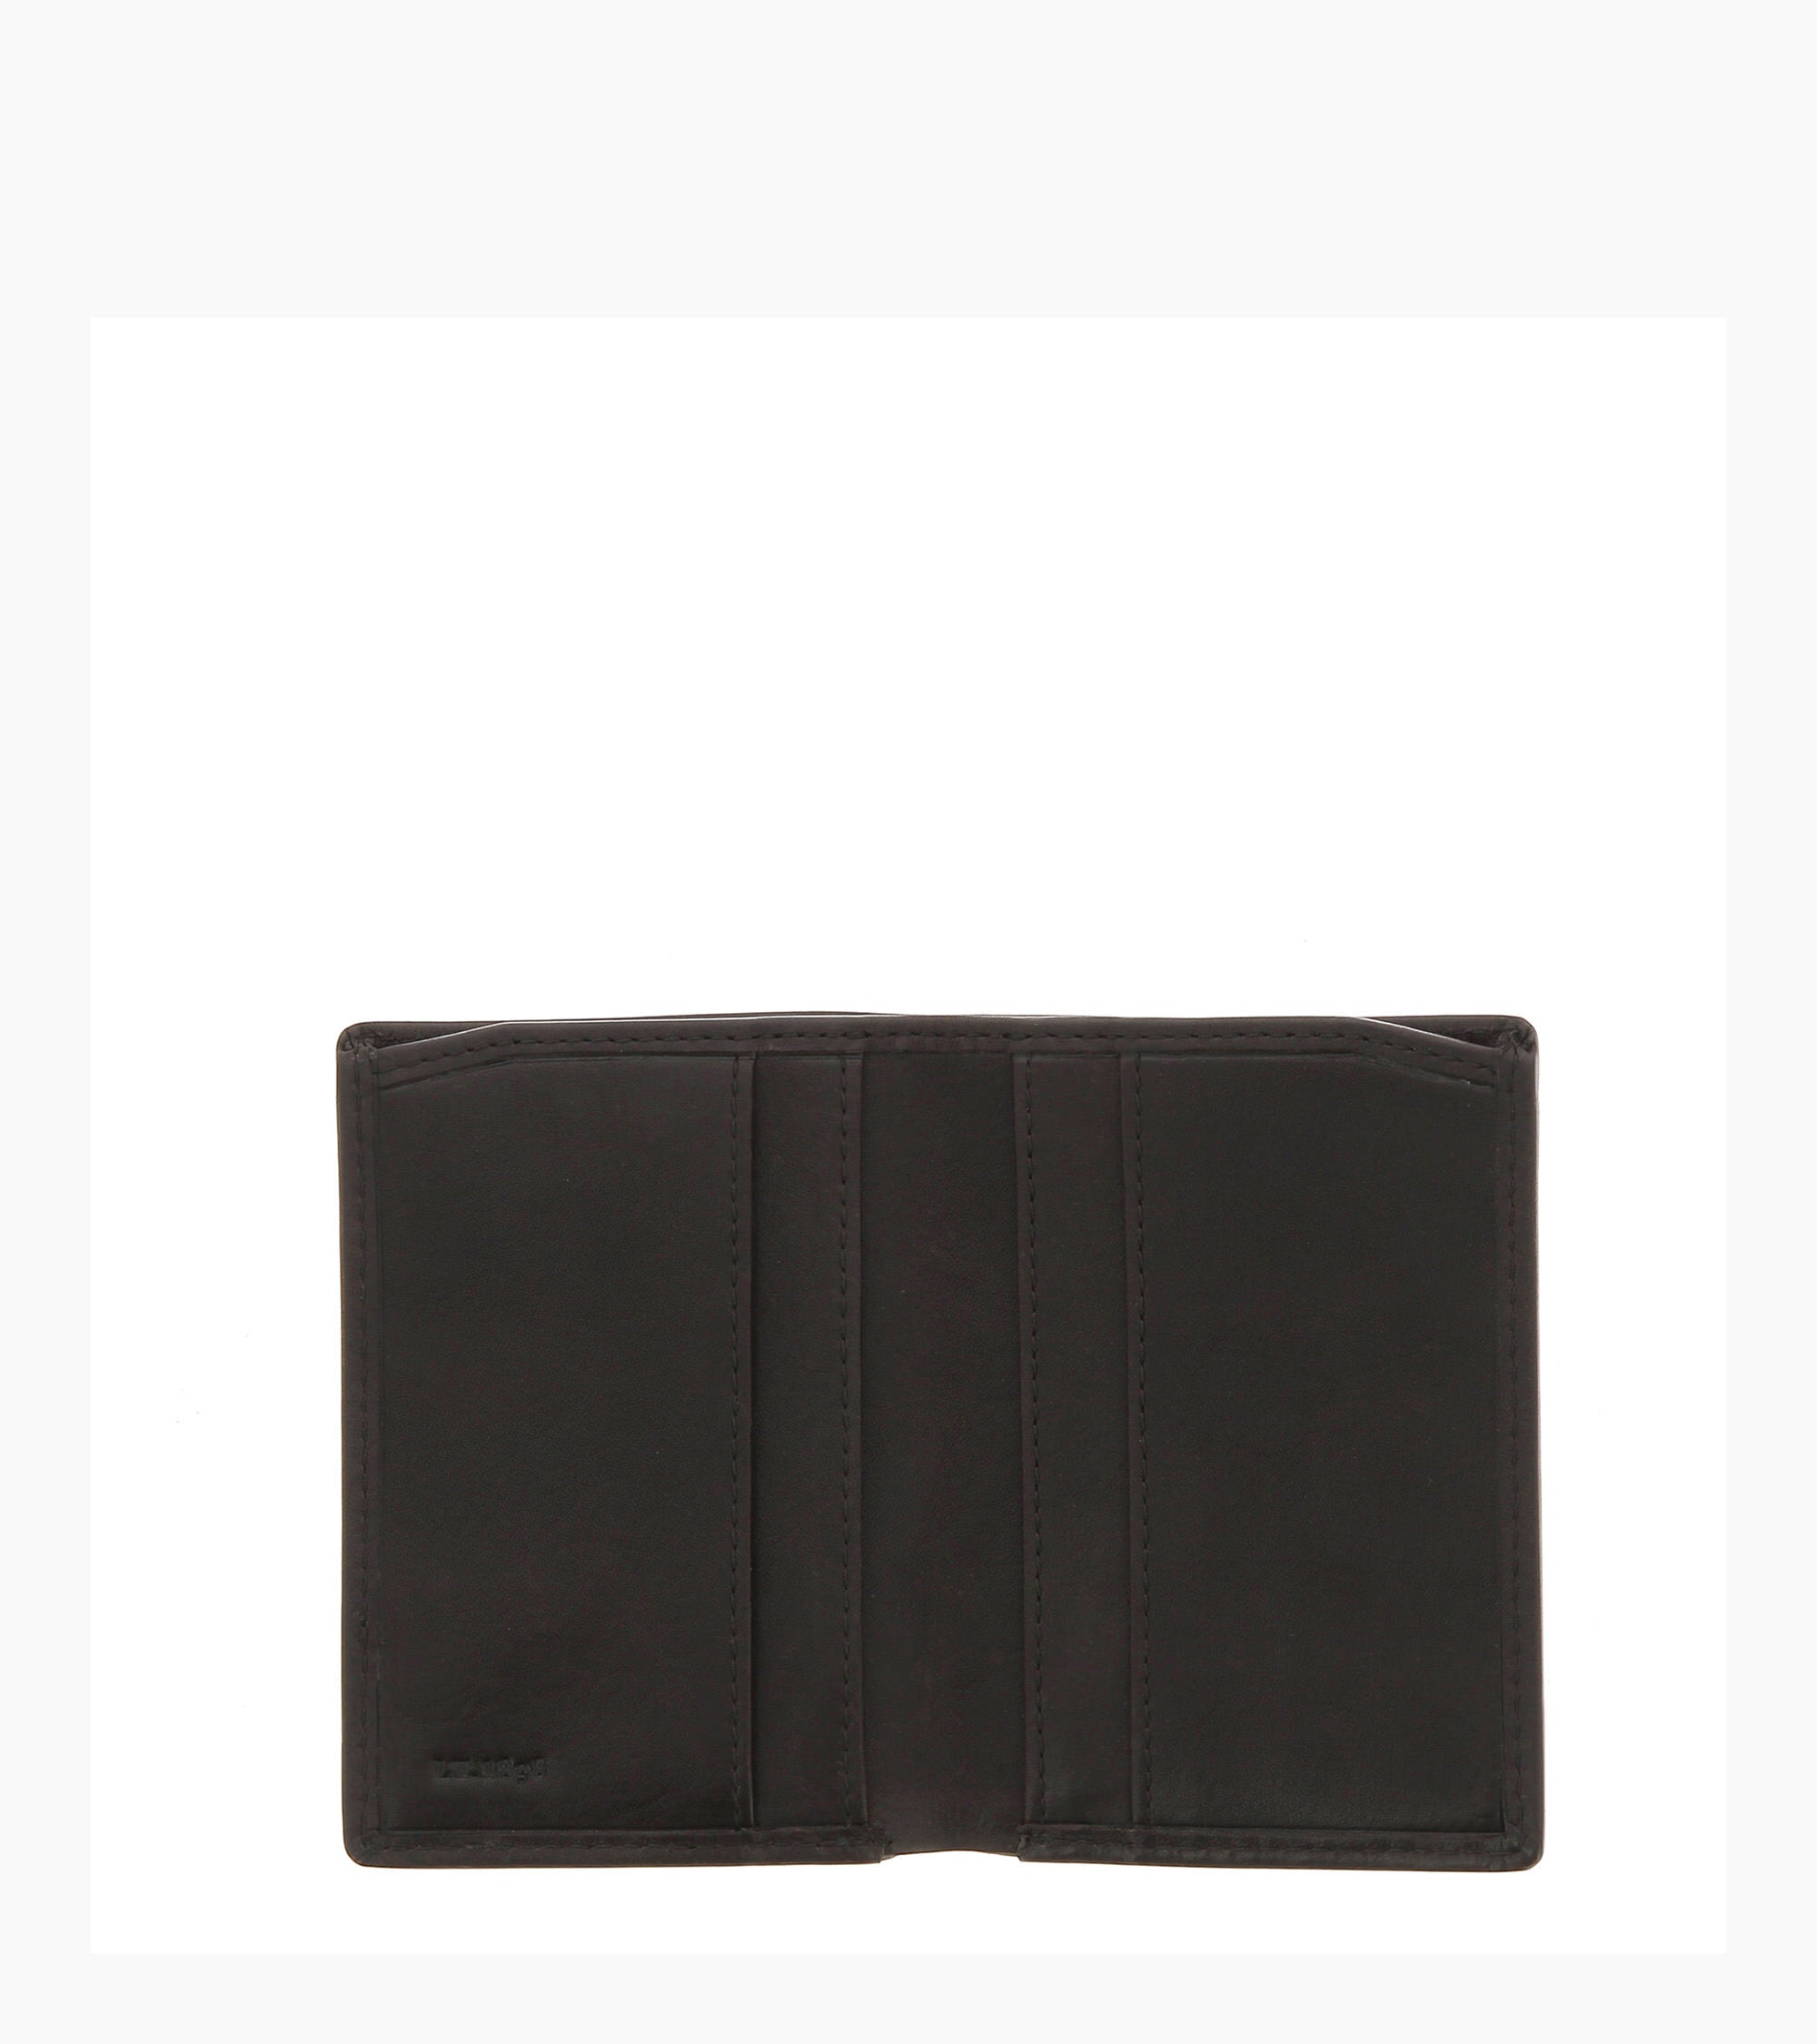 Gary oiled leather cardholder